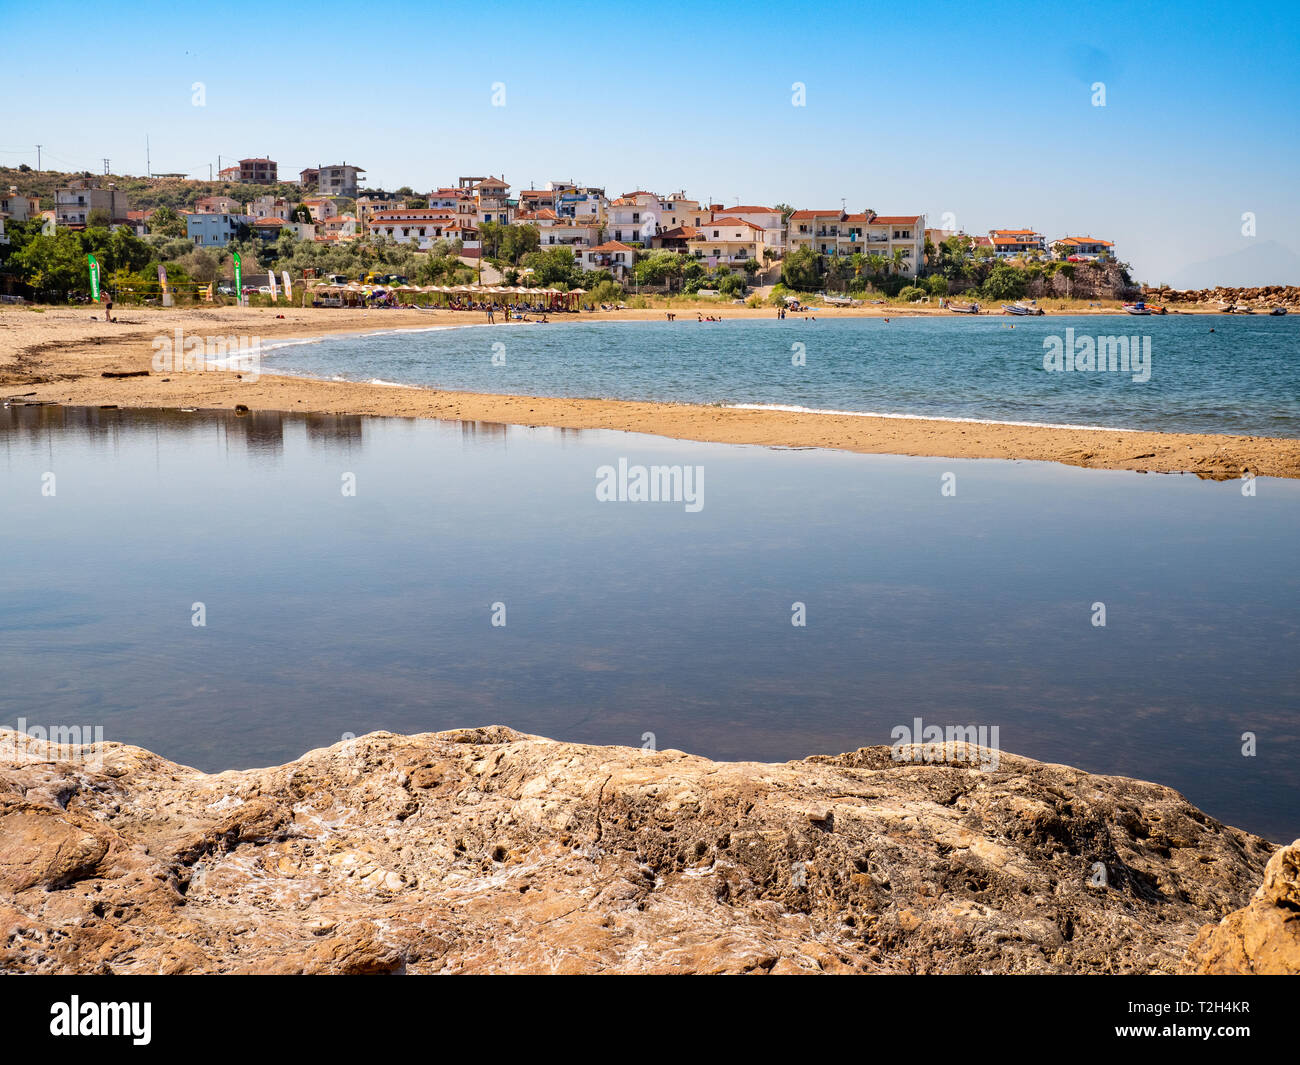 Skala Marion town and beach (Platanes Beach) in the southern part of Thasos Islang, Greece Stock Photo